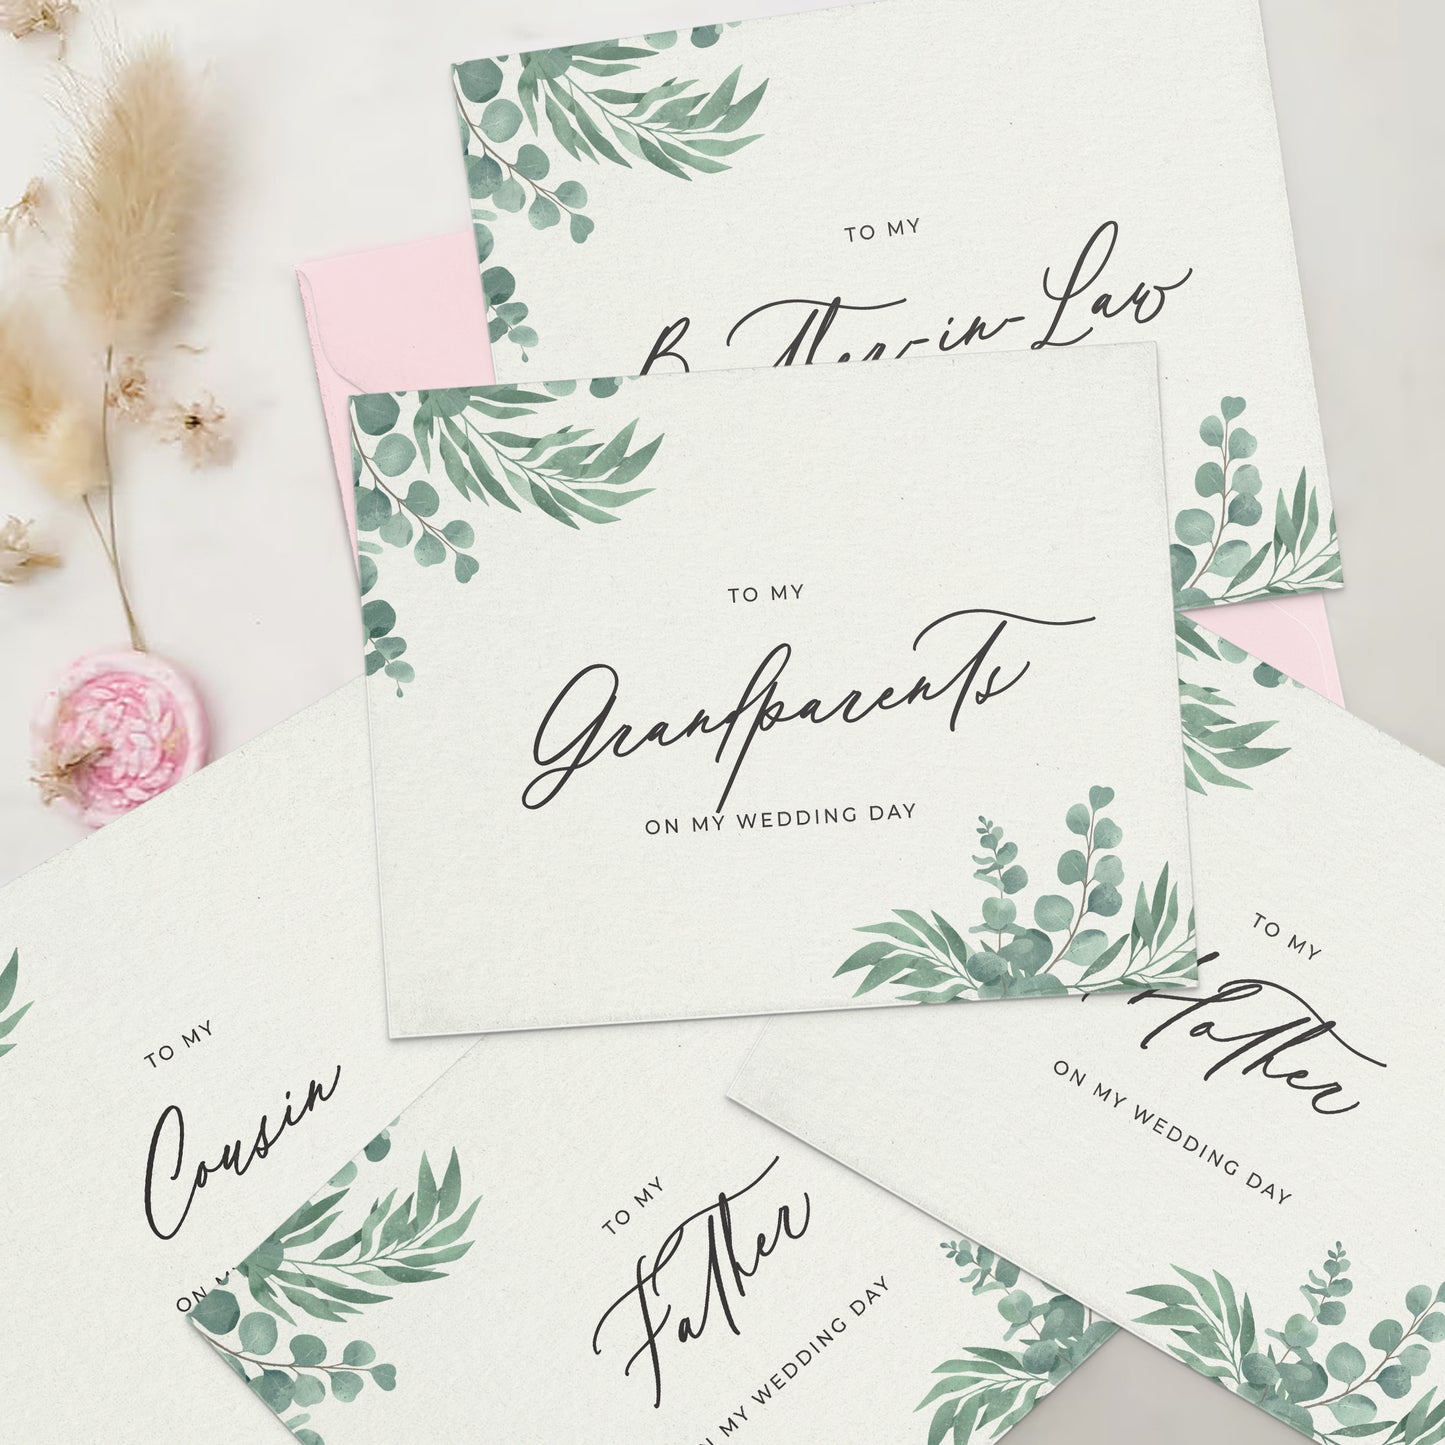 To my on my wedding day note cards collection in greenery design with eucalyptus leaves and calligraphy font from XOXOKristen.